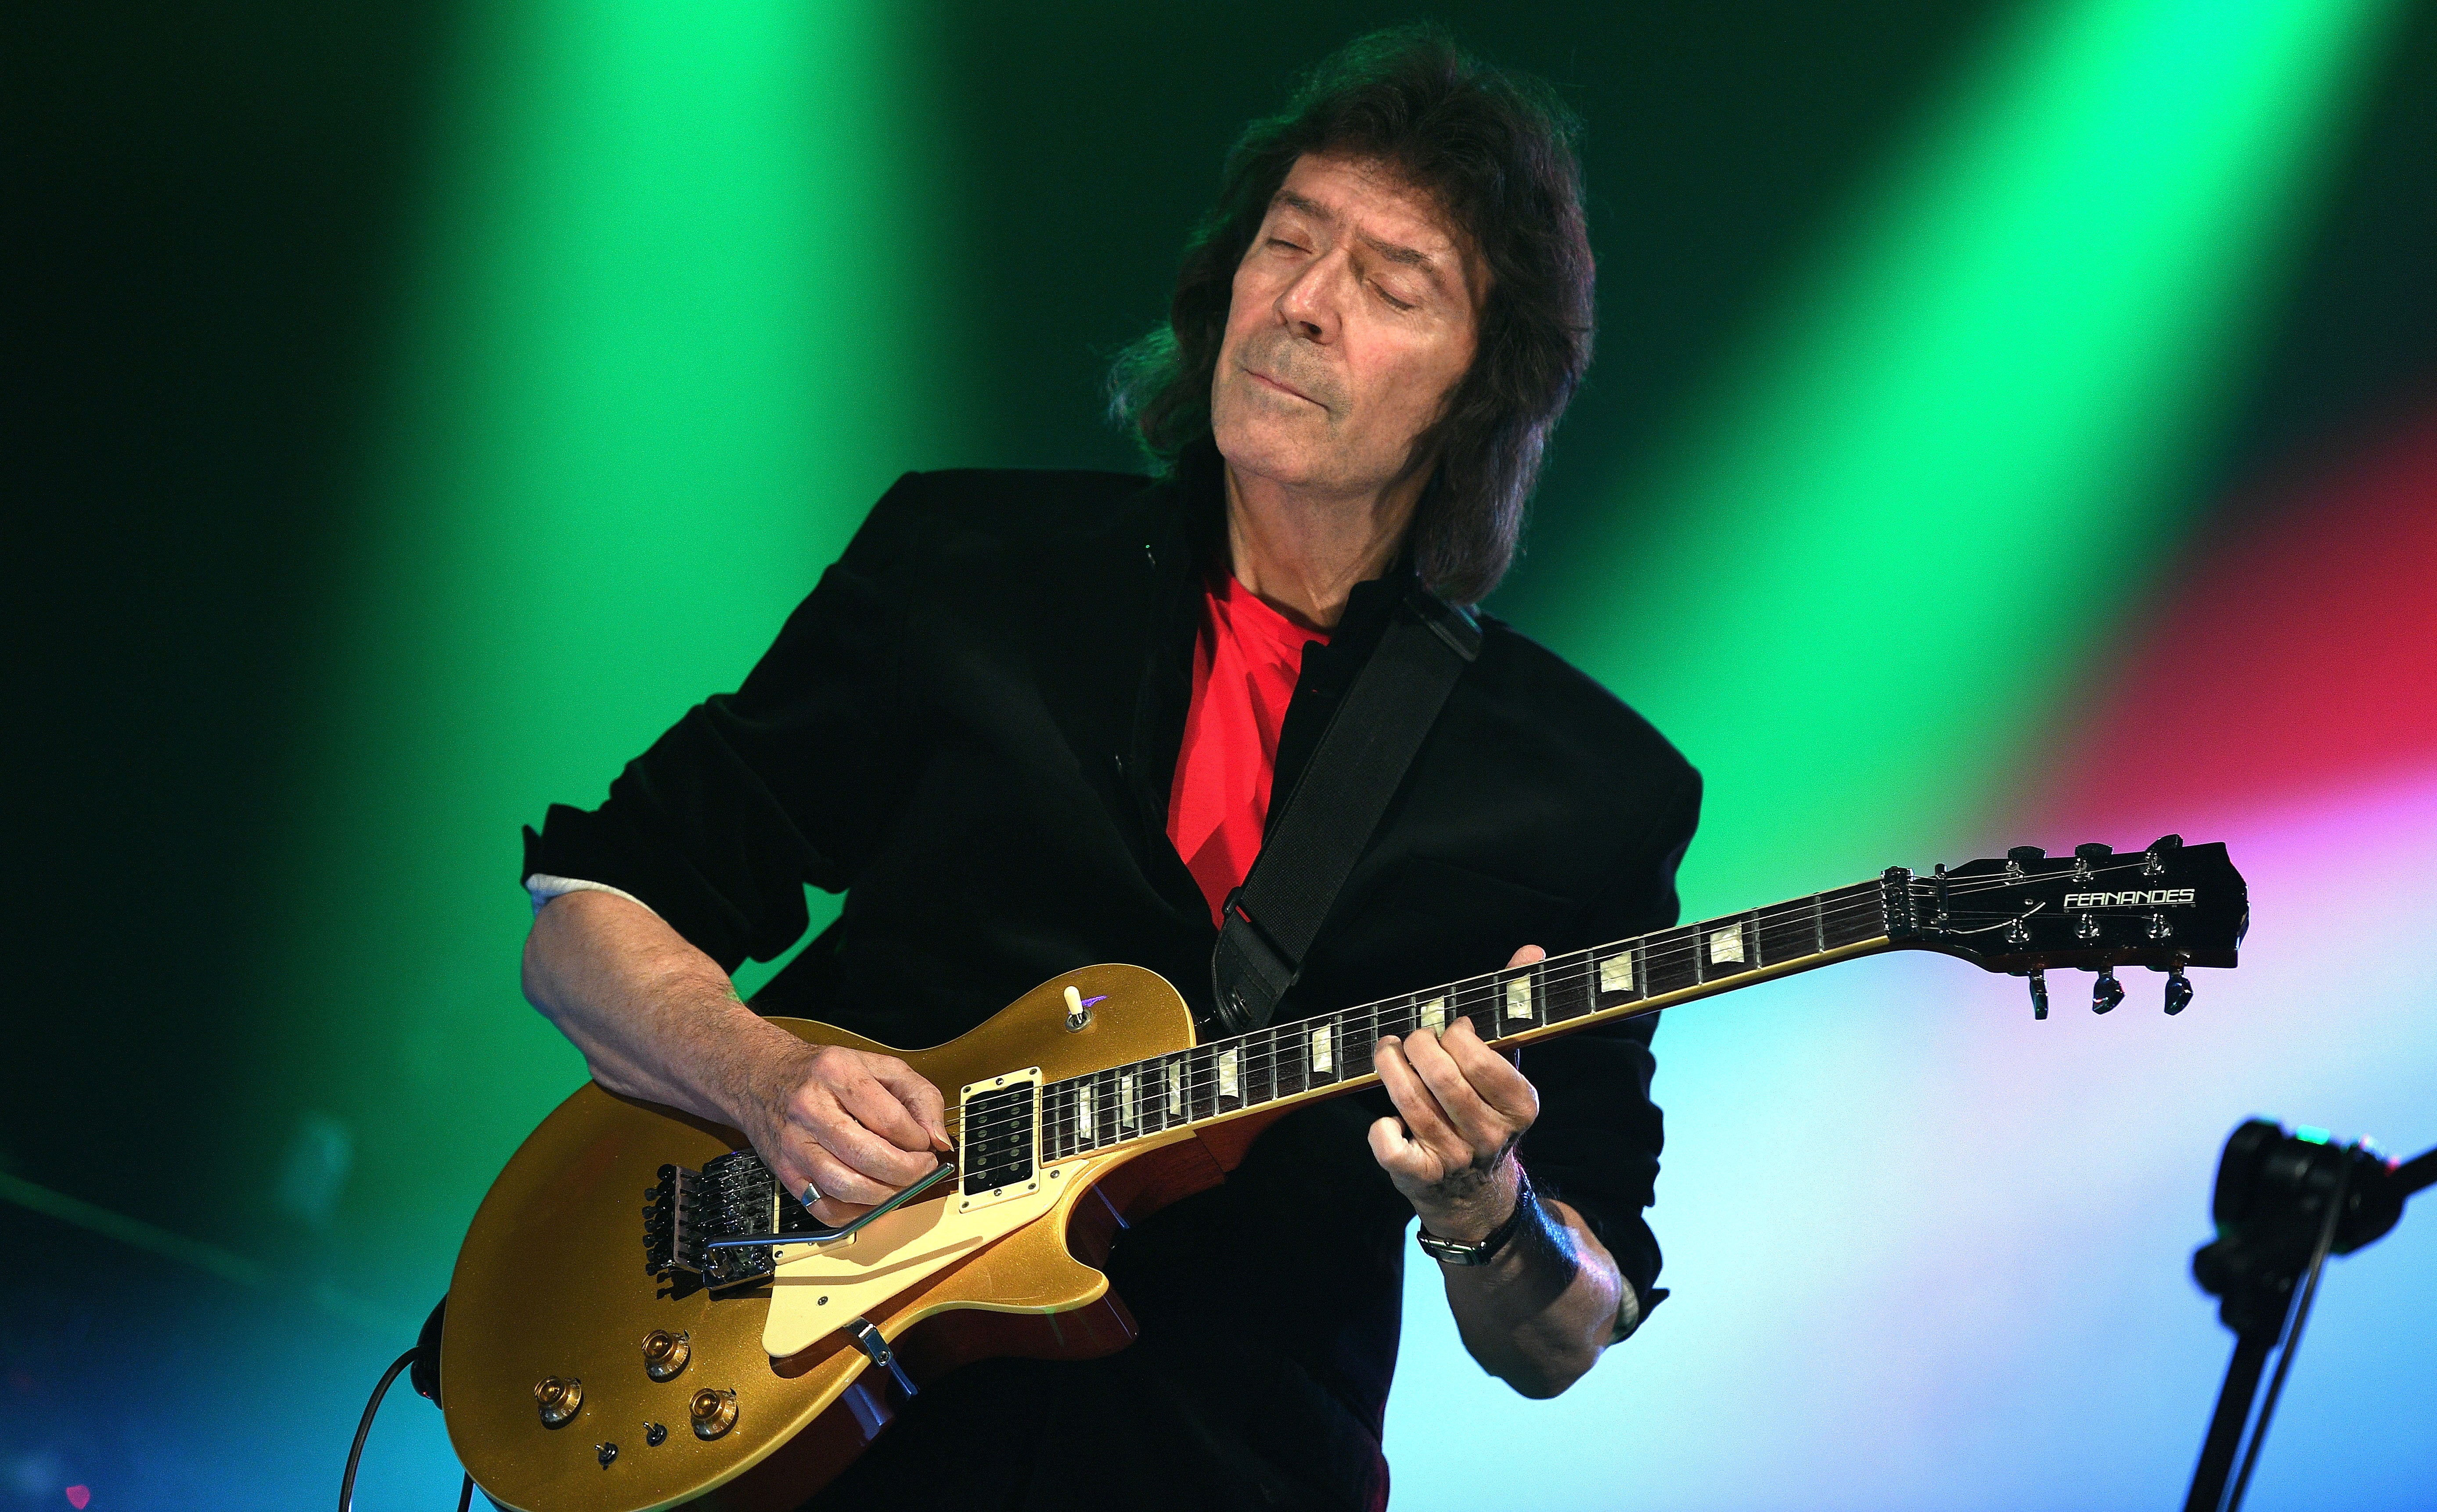 An Evening with Steve Hackett: Genesis Revisited, Foxtrot at 50 & More free presale password